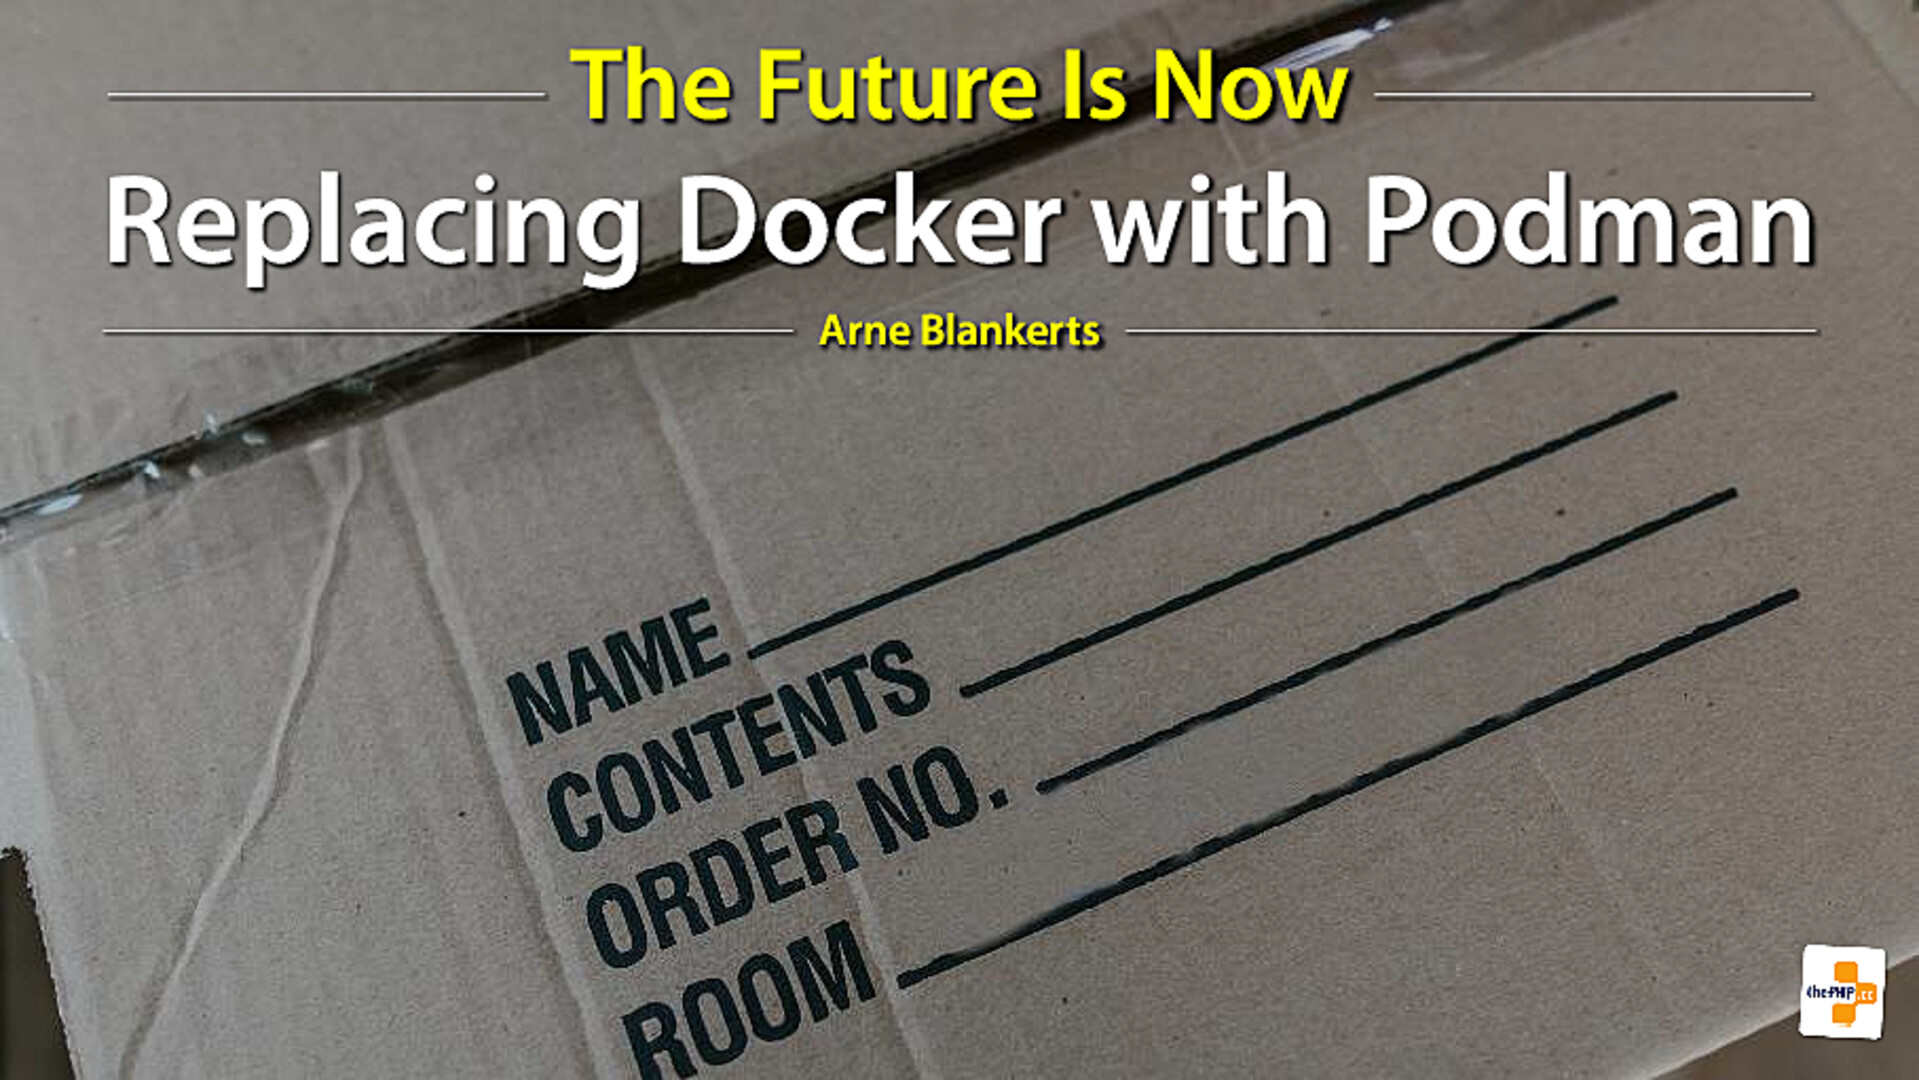 The Future is Now: Replacing Docker with Podman